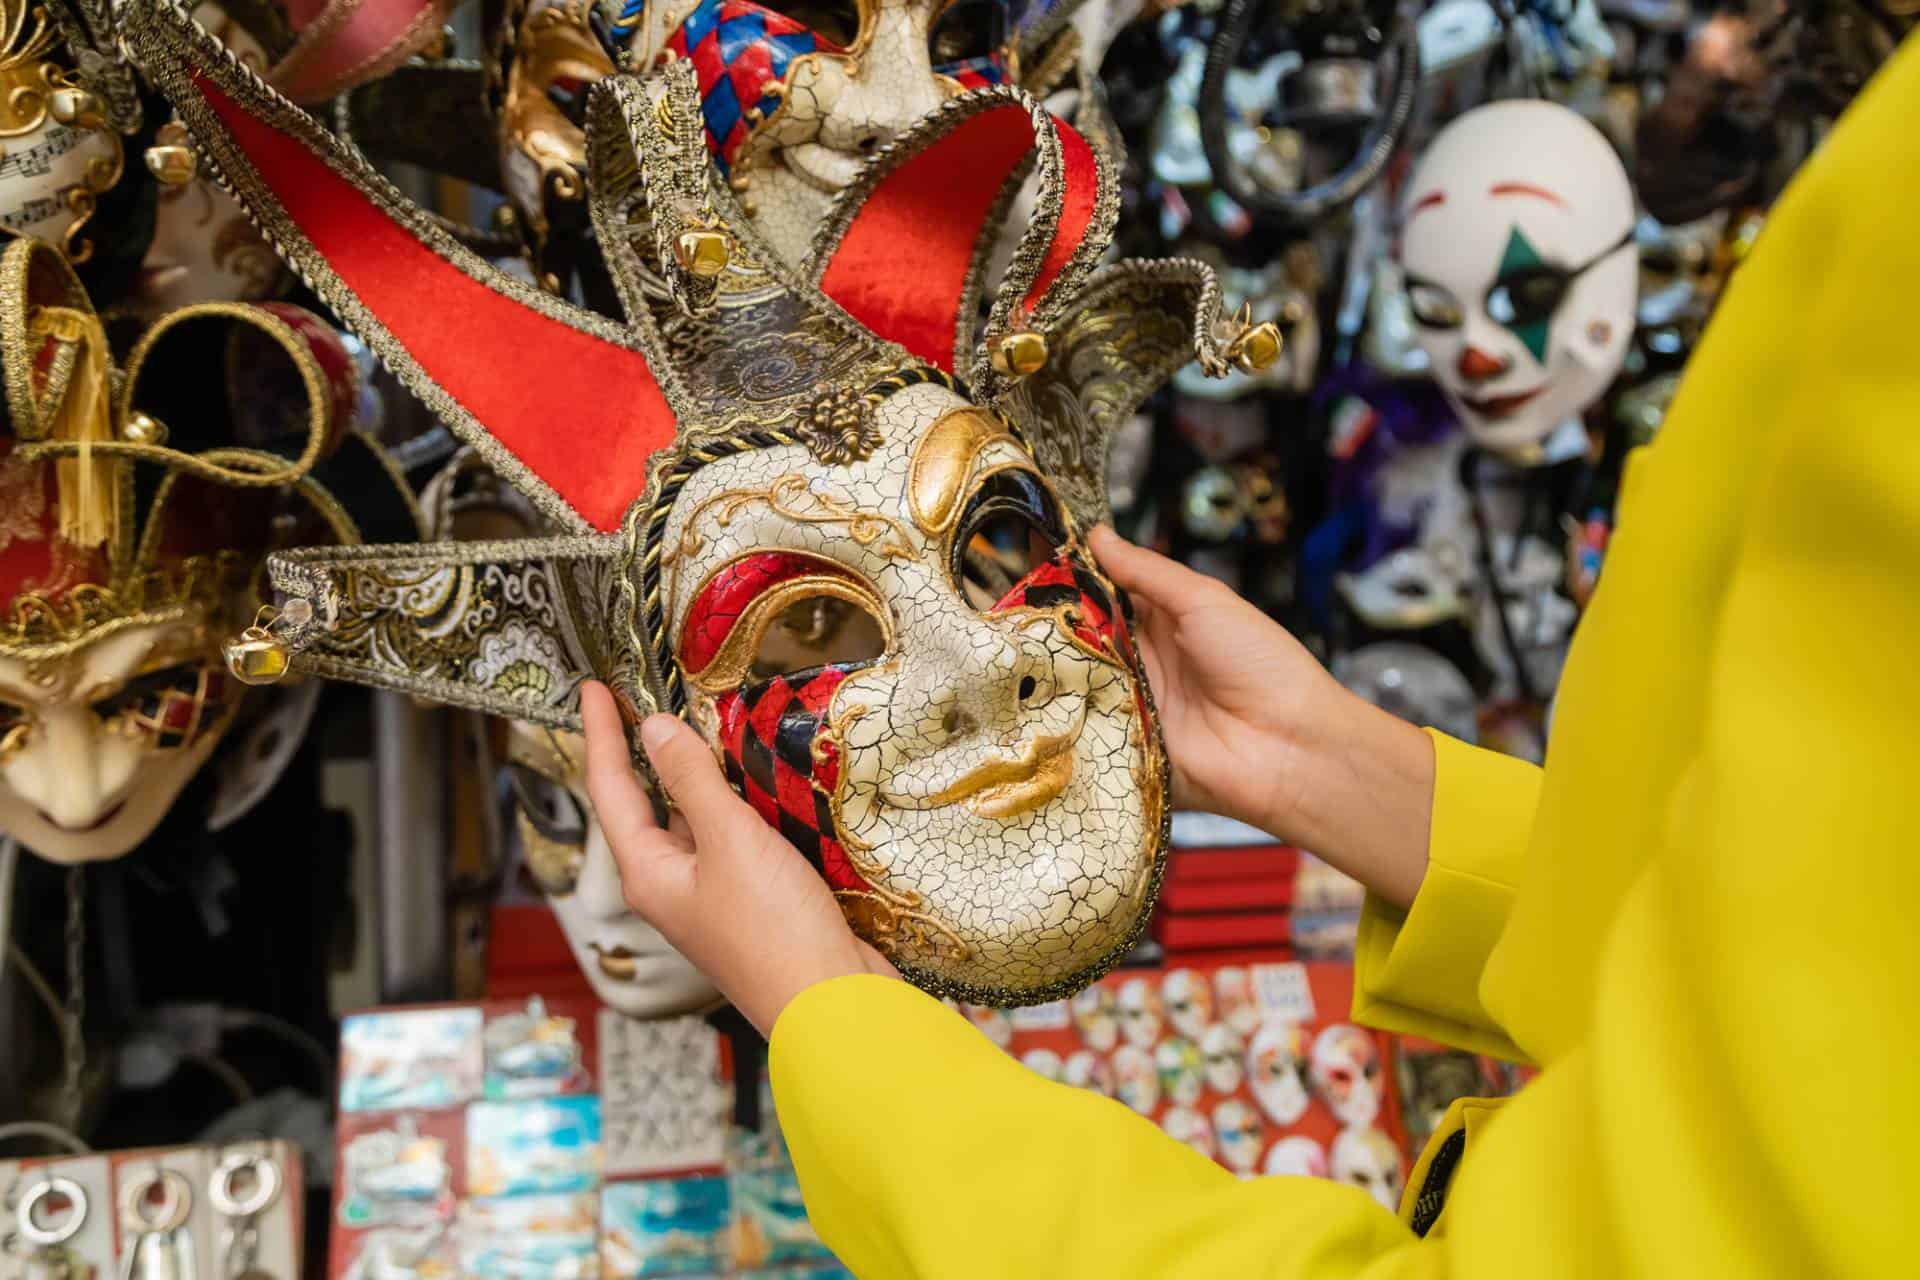 Partial view of woman holding colorful carnival mask in Venice, Italy.